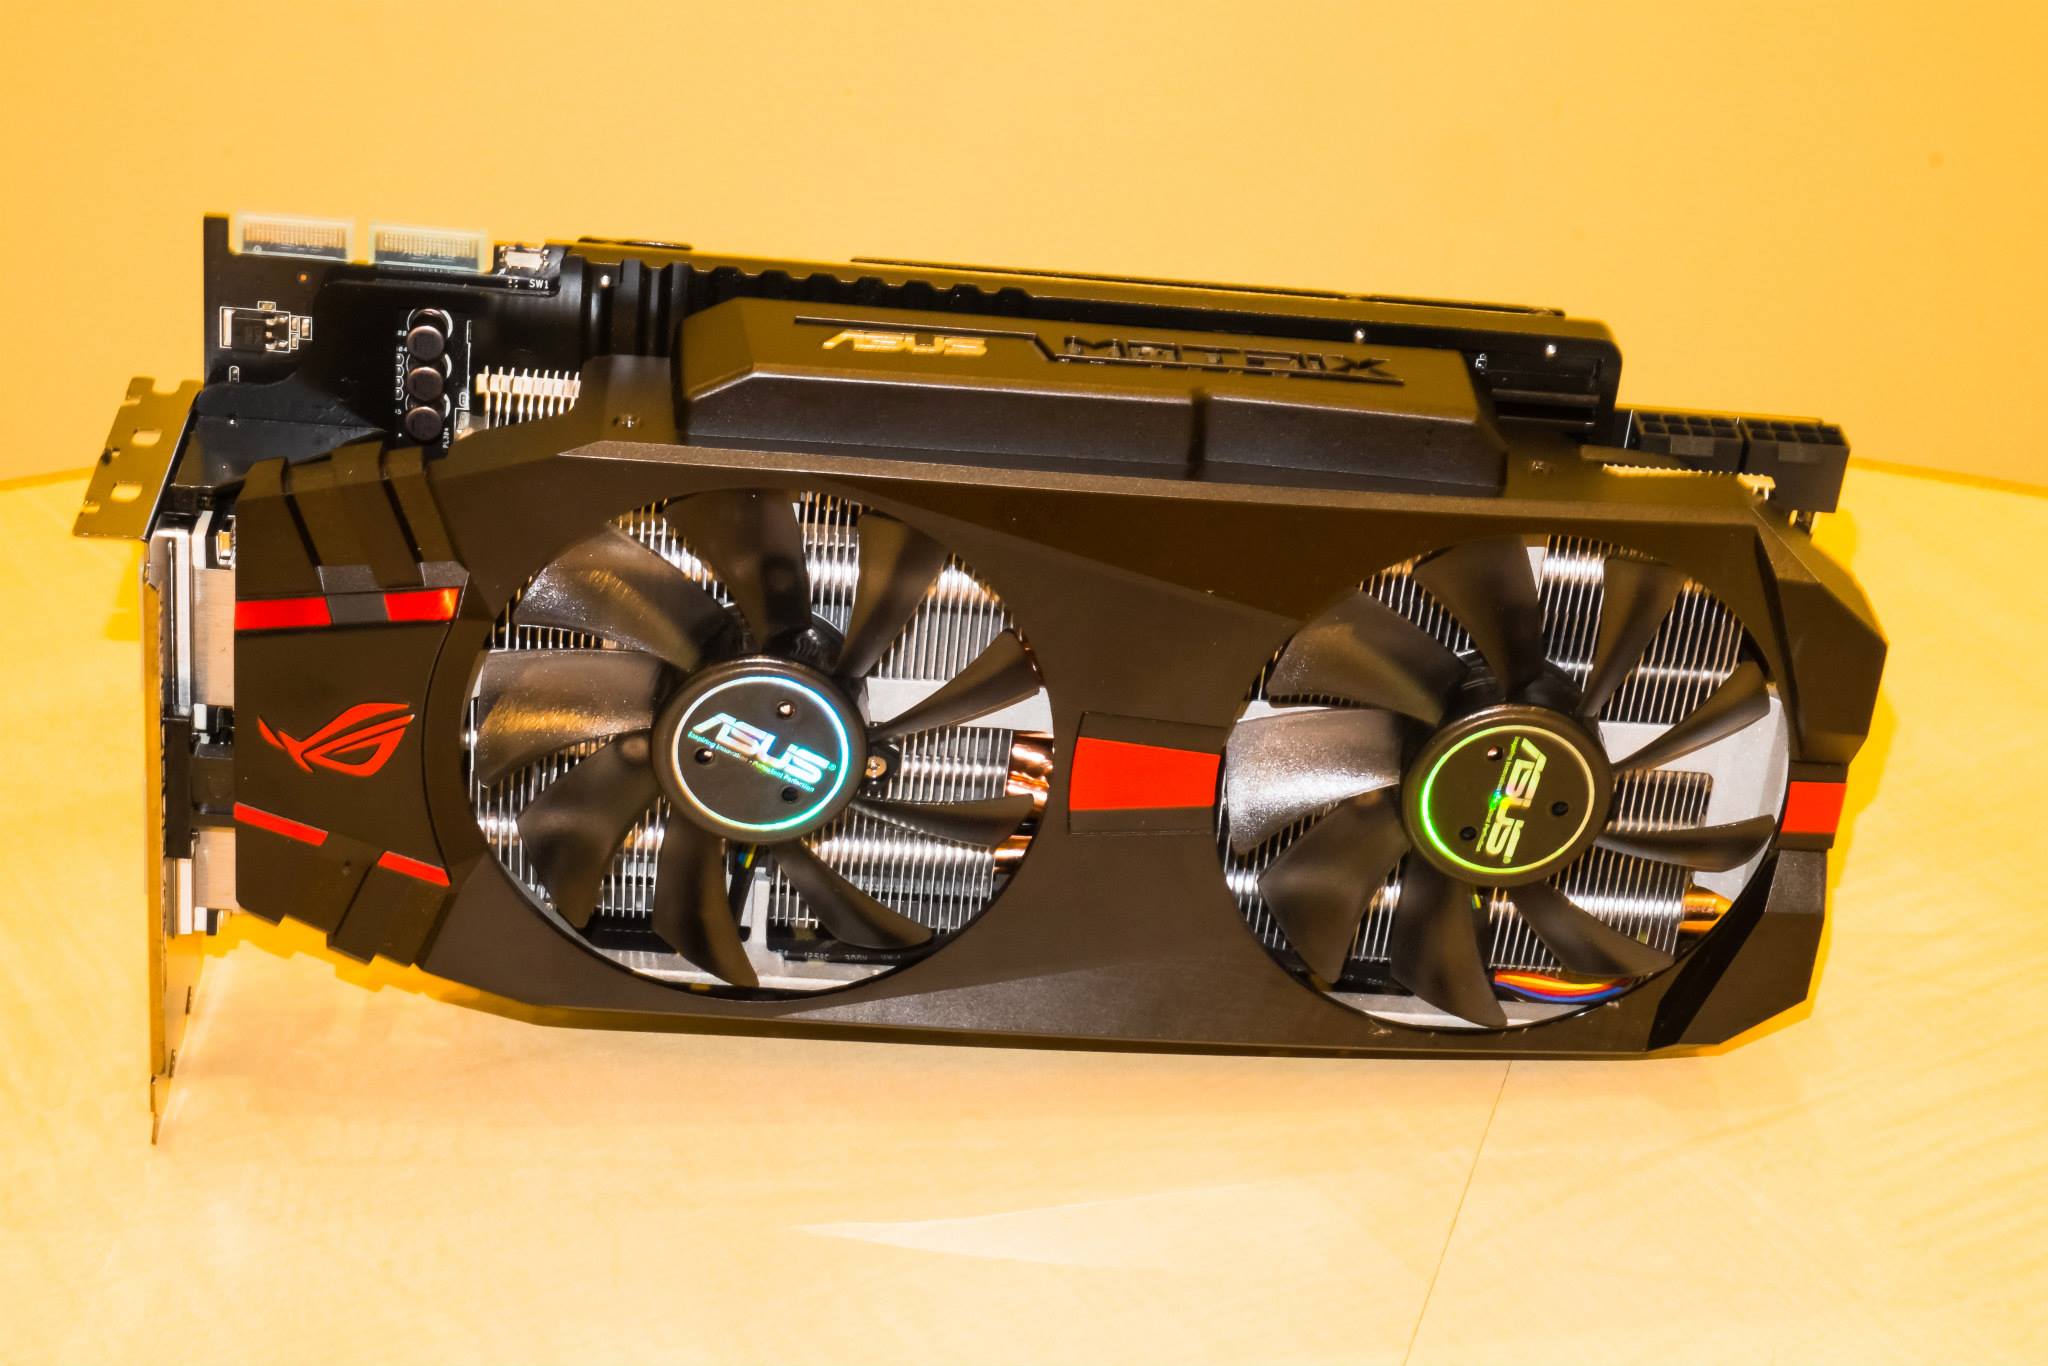 Media asset (photo, screenshot, or image in full size) related to contents posted at 3dfxzone.it | Image Name: news20183-ASUS-ROG-Matrix-R9-280X-Platinum_1.jpg